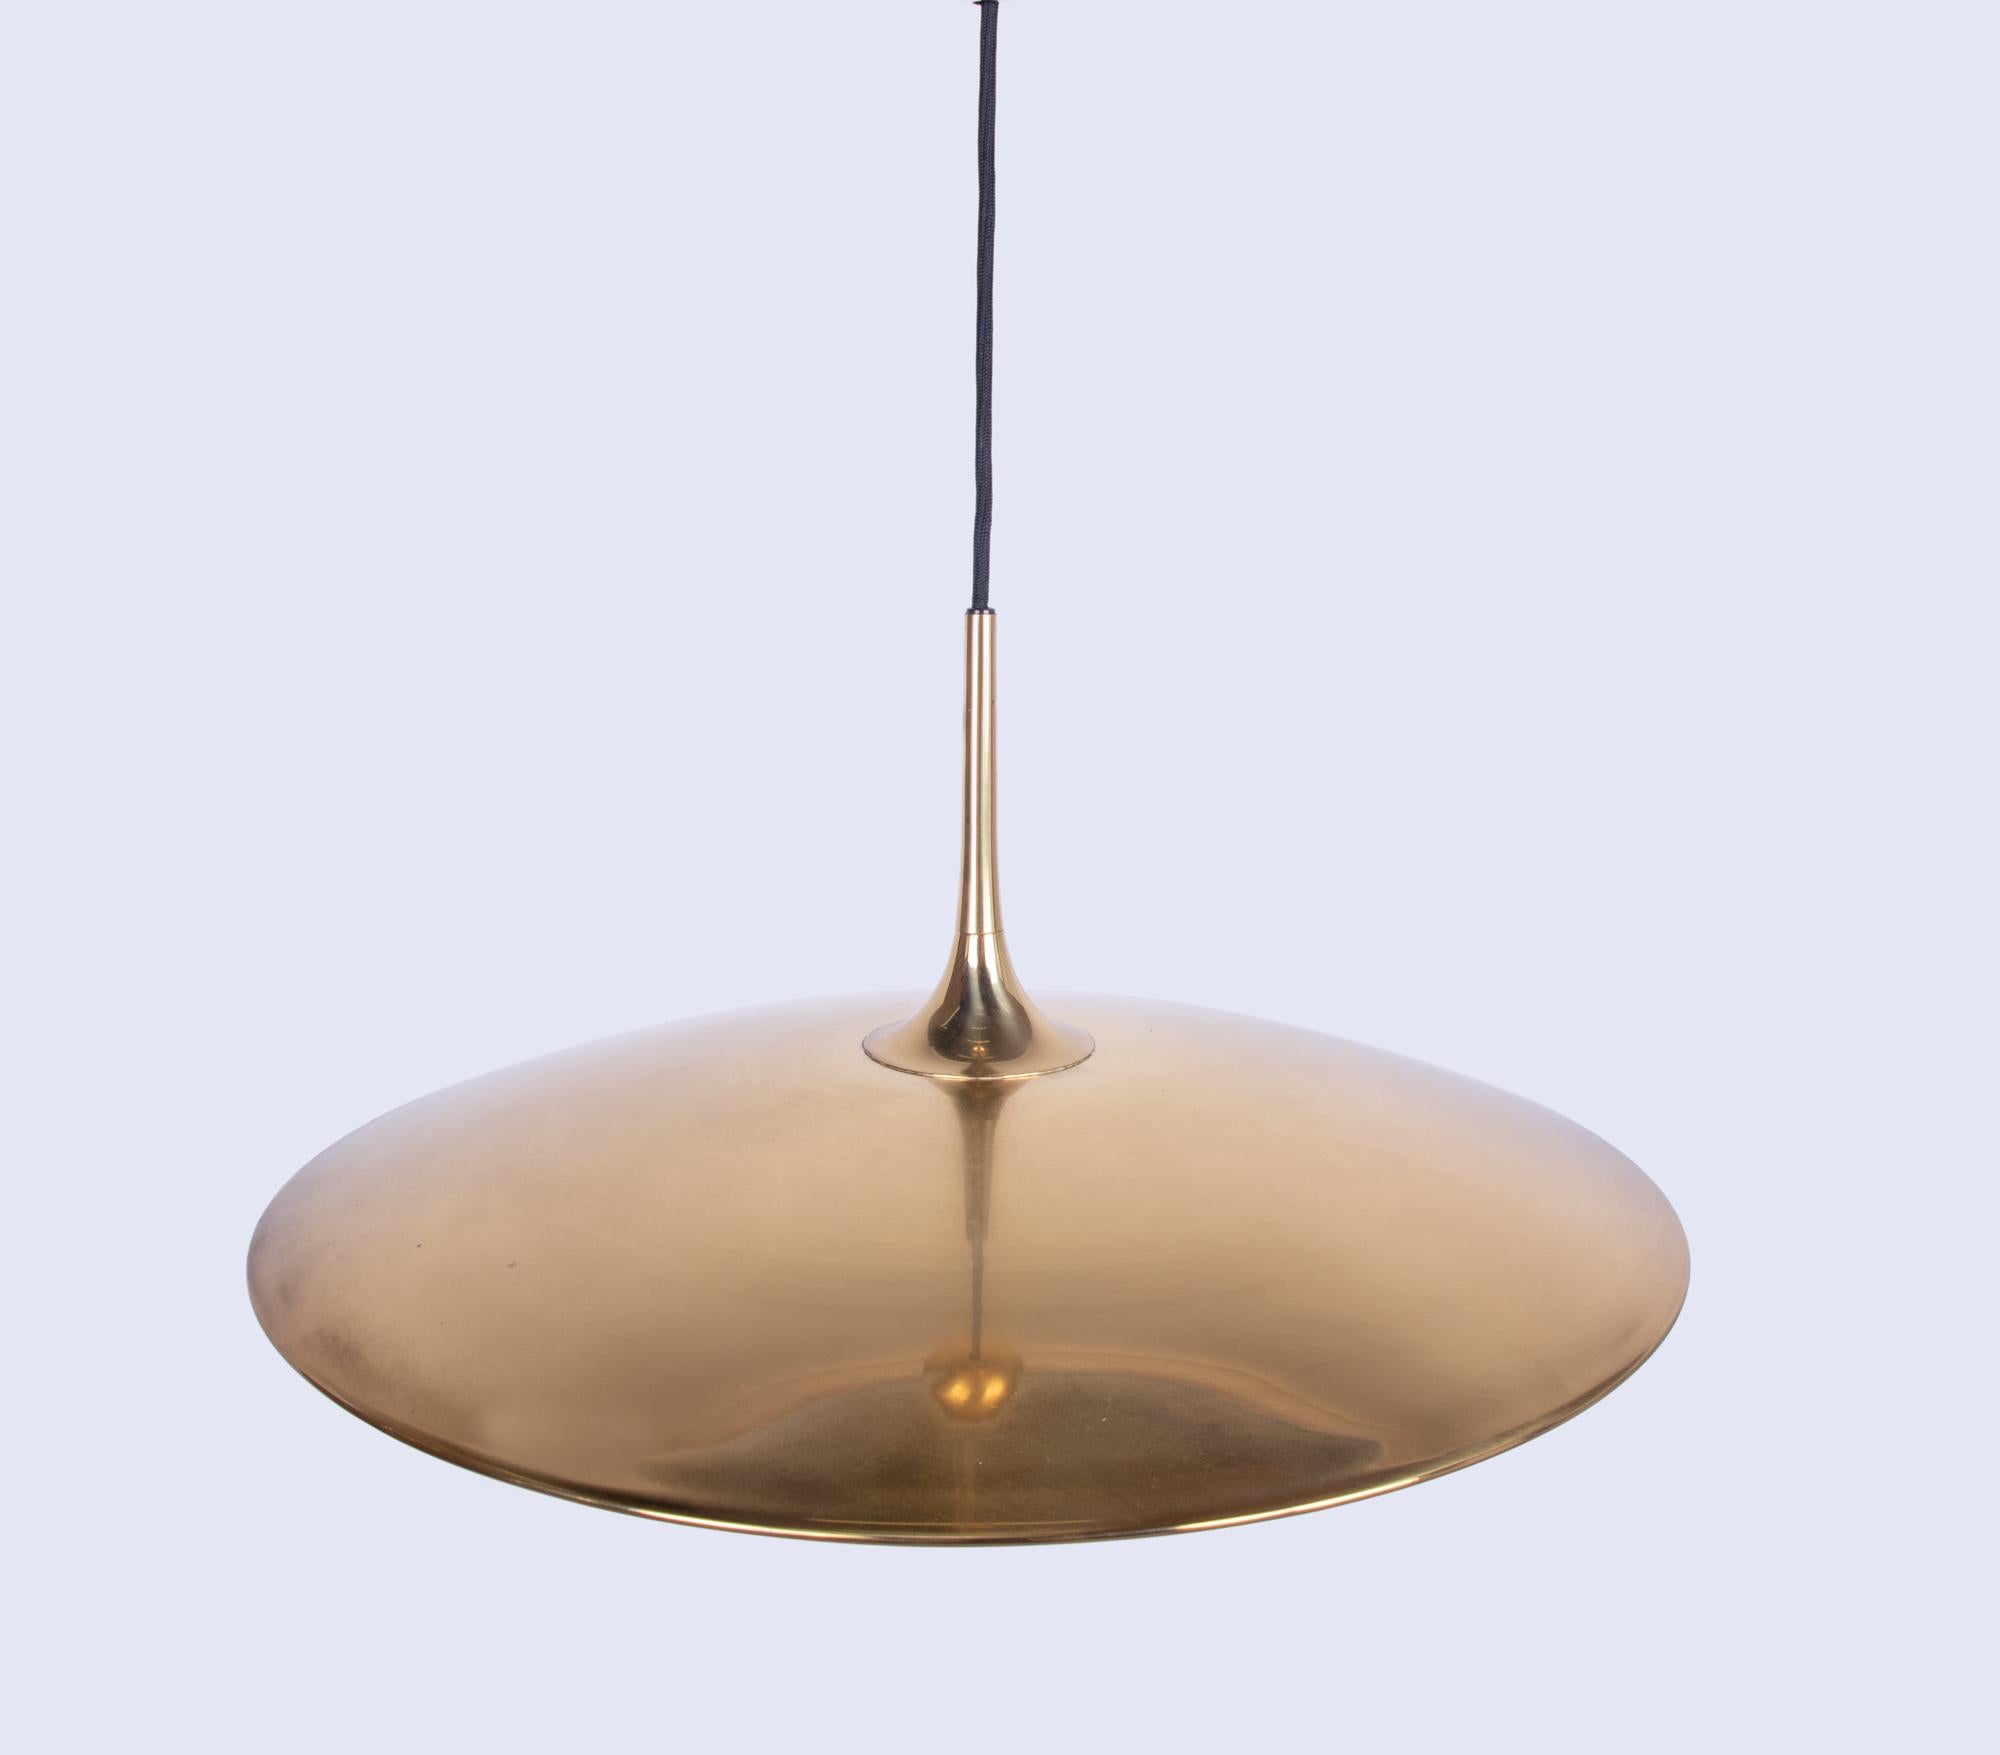 Adjustable Brass Pendant Lamp Onox 55 by Florian Schulz, Germany, 1970s For Sale 1